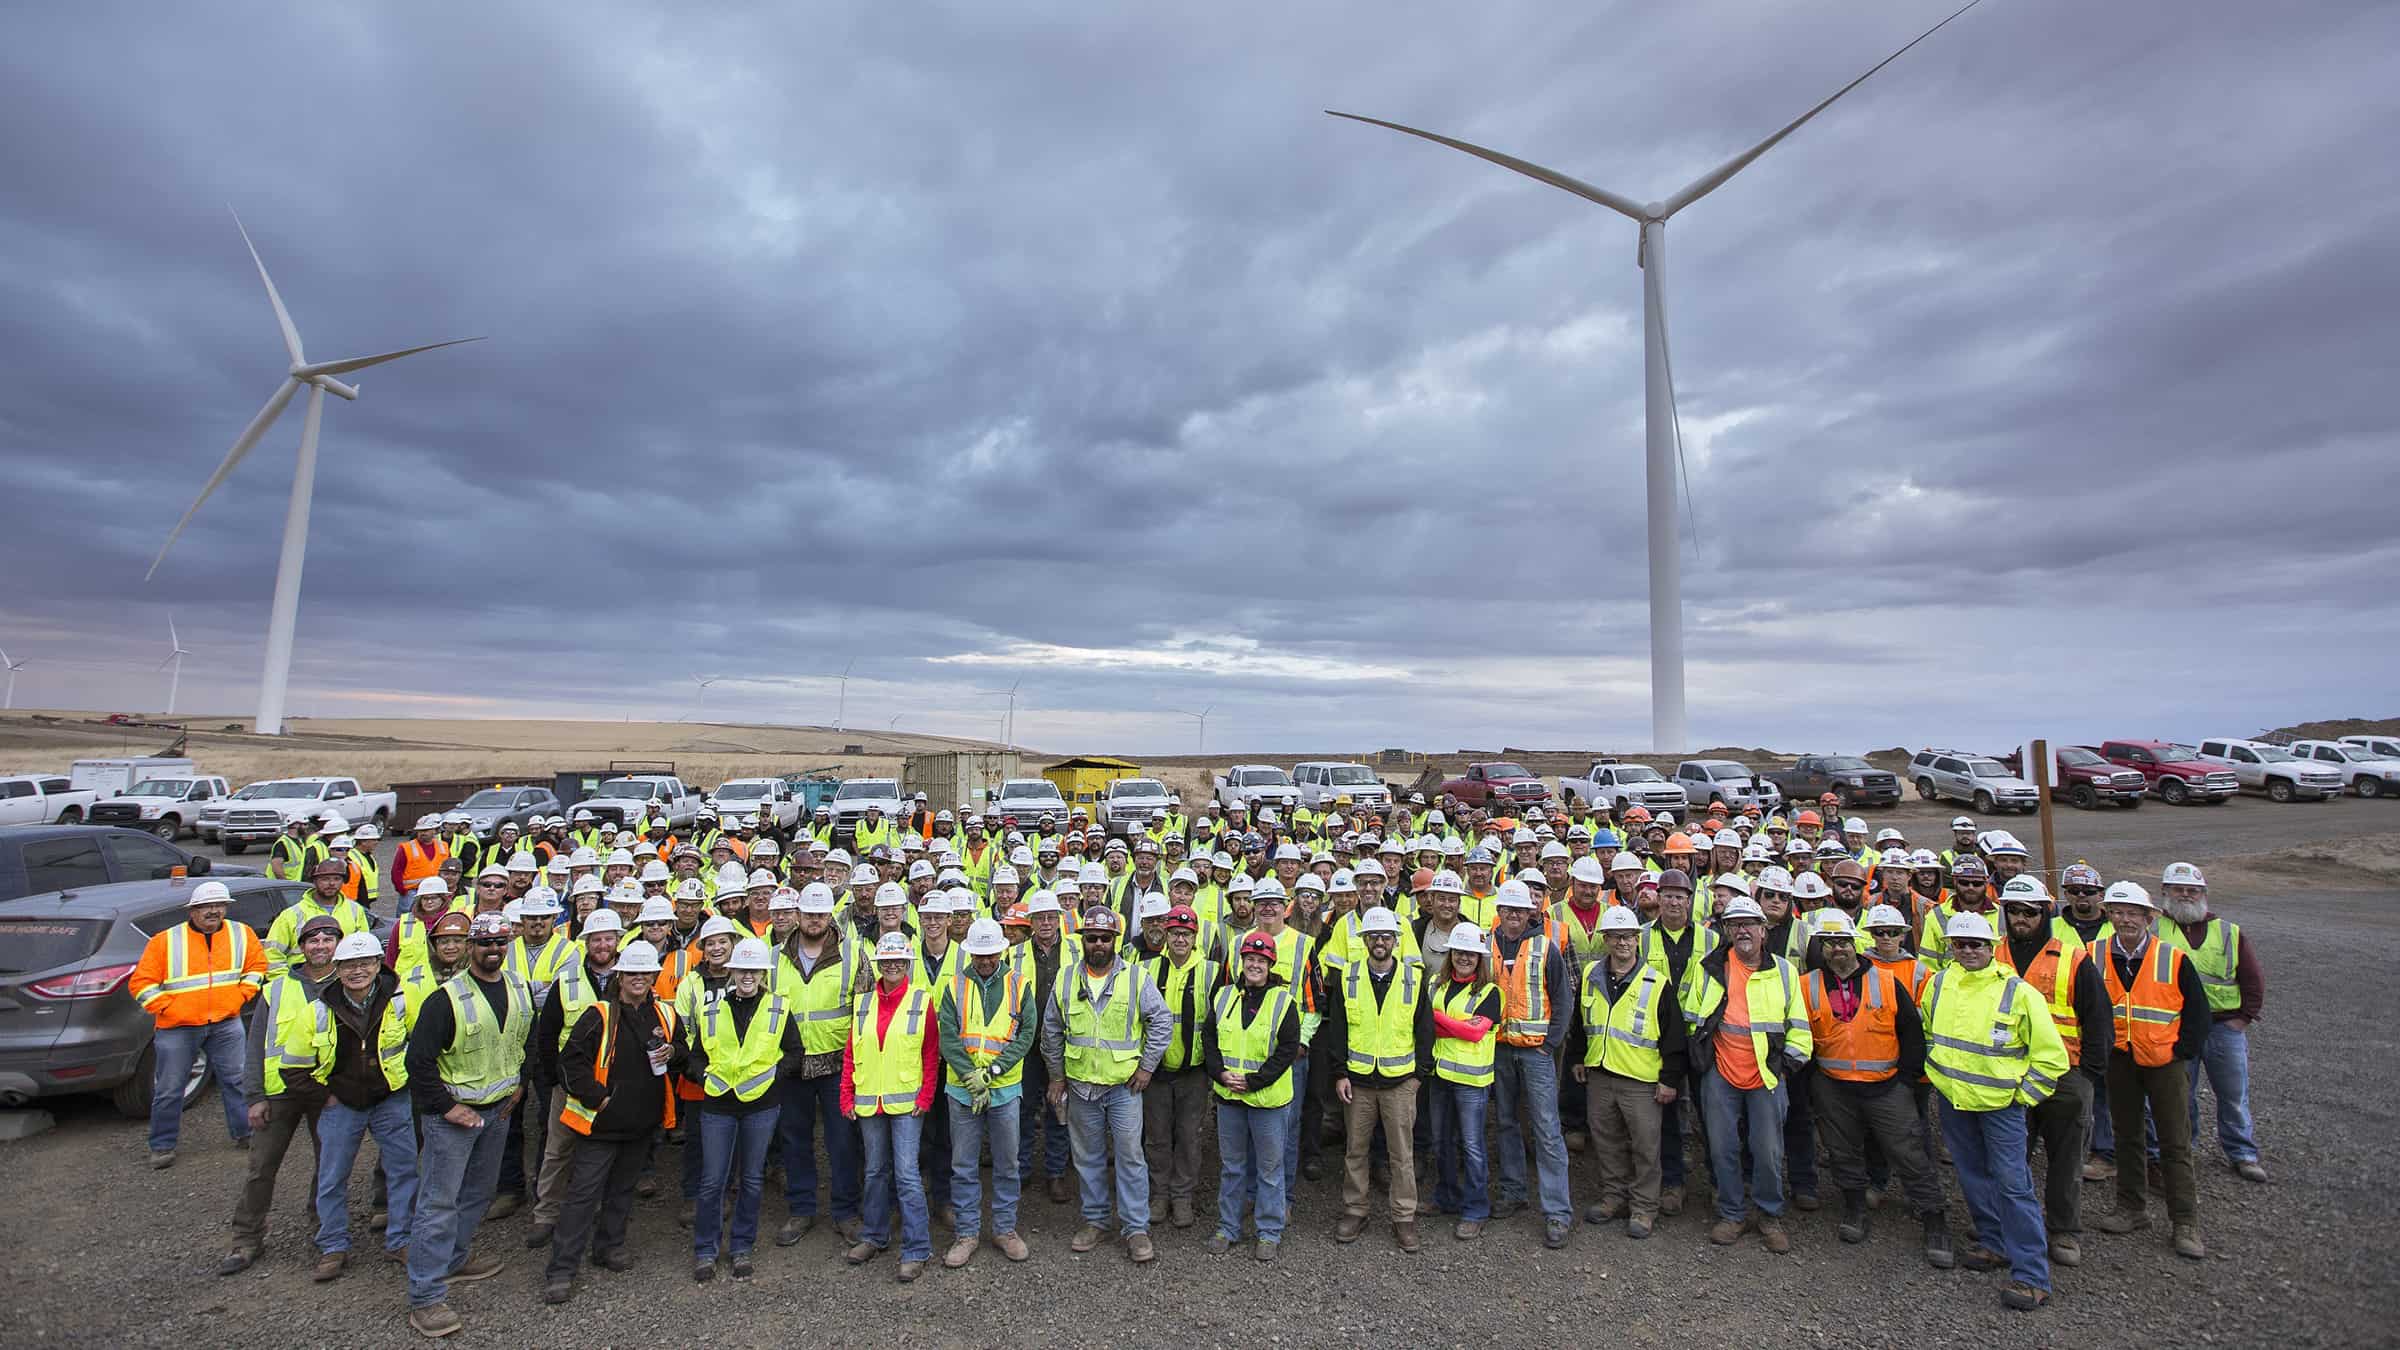 Portland General Electric Company - Tucannon River Wind Farm - Group of Employees Standing in Parking Lot Beneath Two Wind Turbines